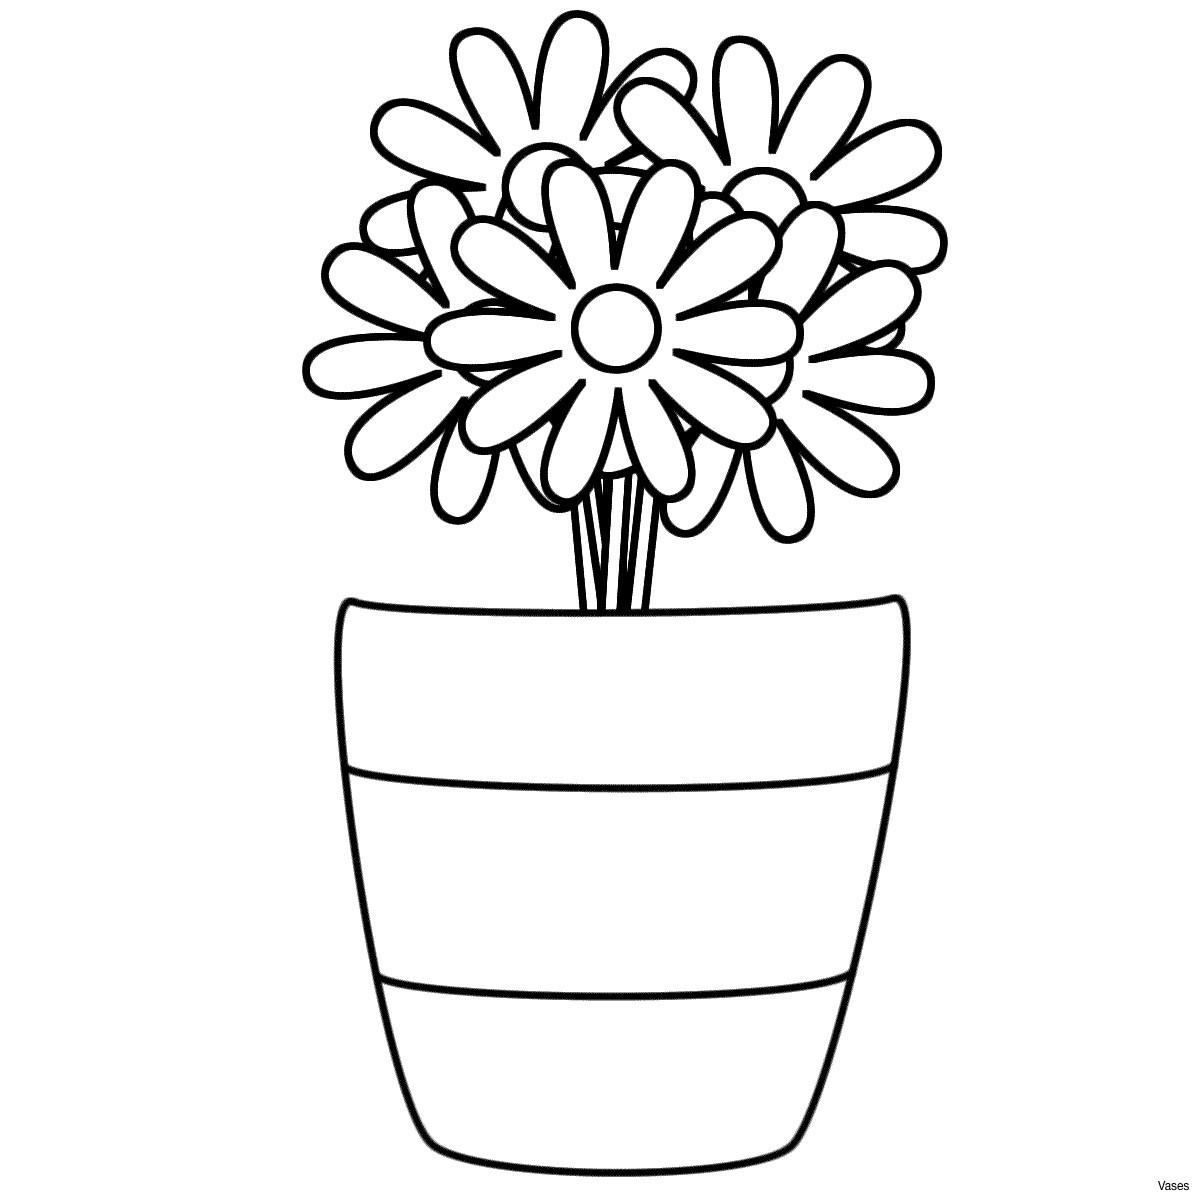 16 Perfect Proflowers Free Vase 2024 free download proflowers free vase of flower coloring page cool coloring pages regarding vase with flowers coloring pages and long orchid flower page cool vases flower vase coloring